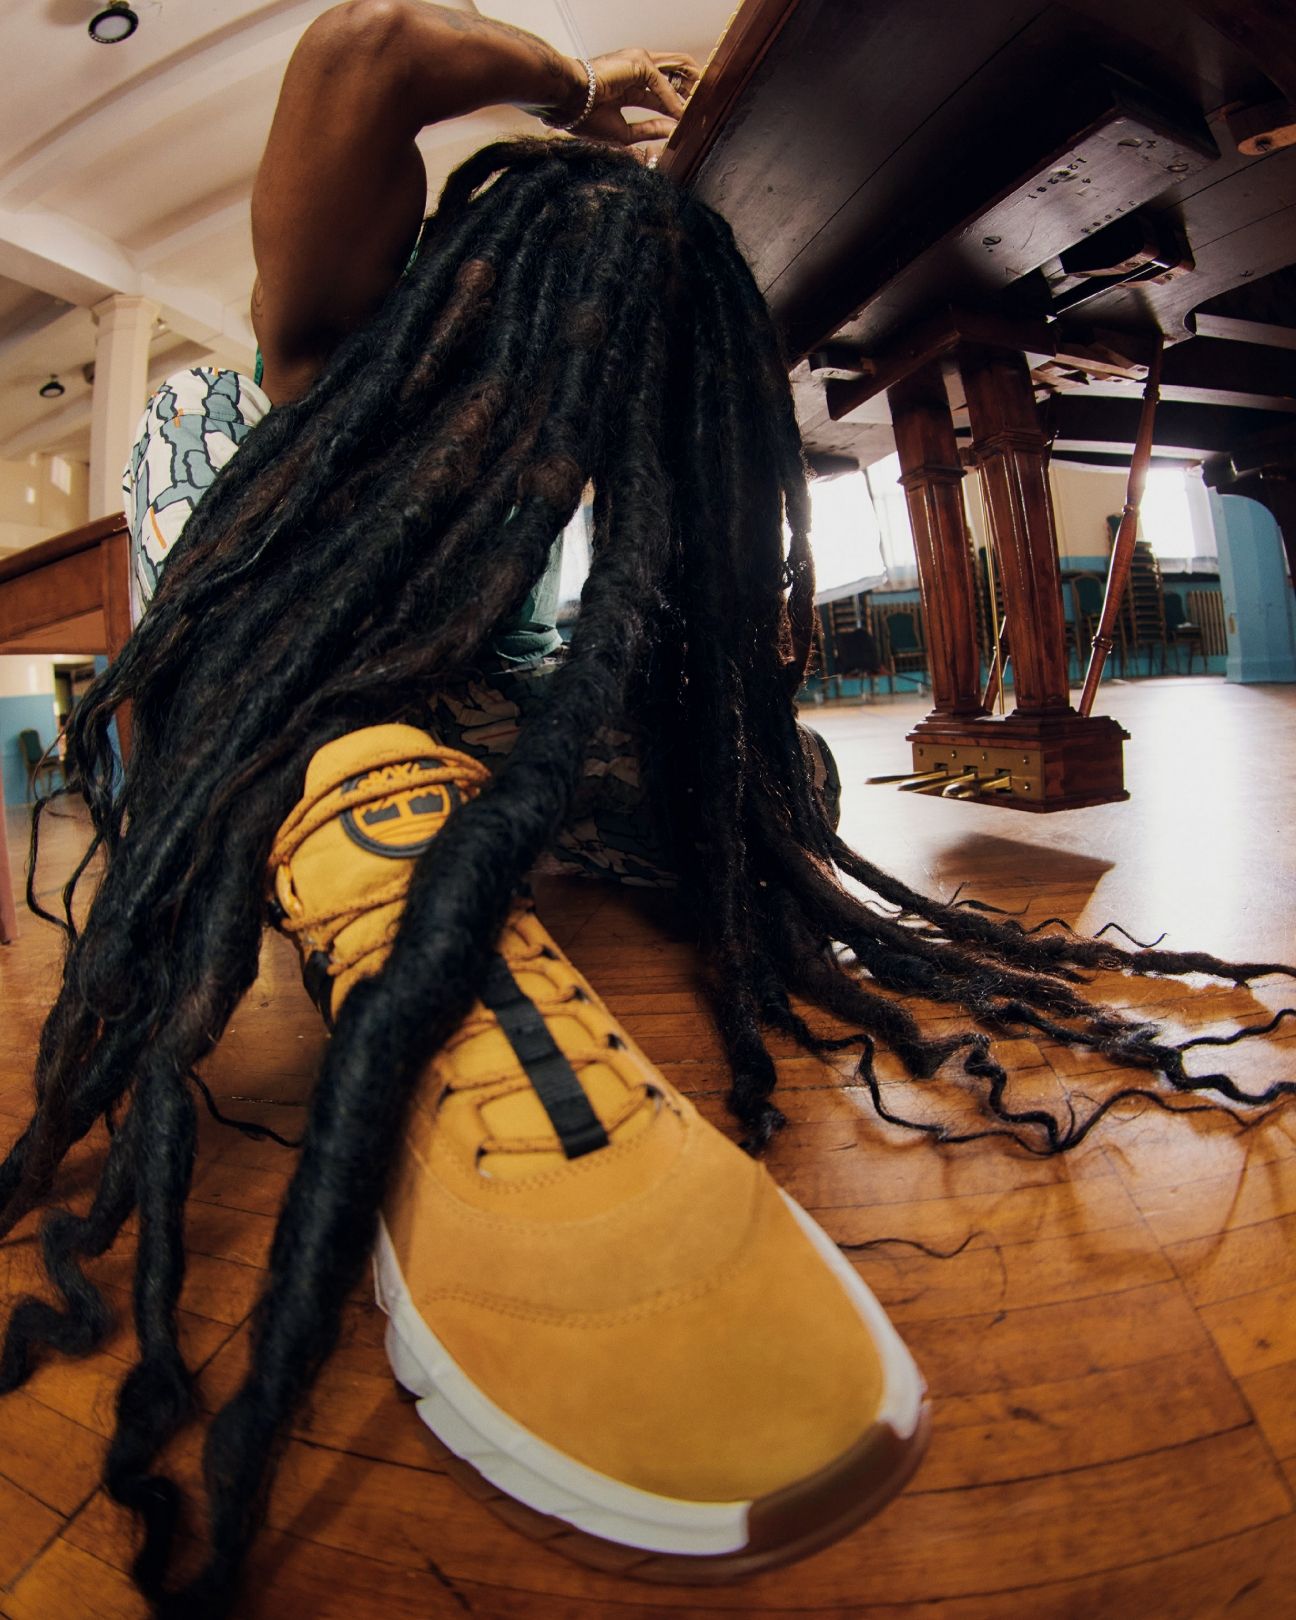 Person with long dreadlocks and timberland shoes at piano with head down so hair goes over shoes